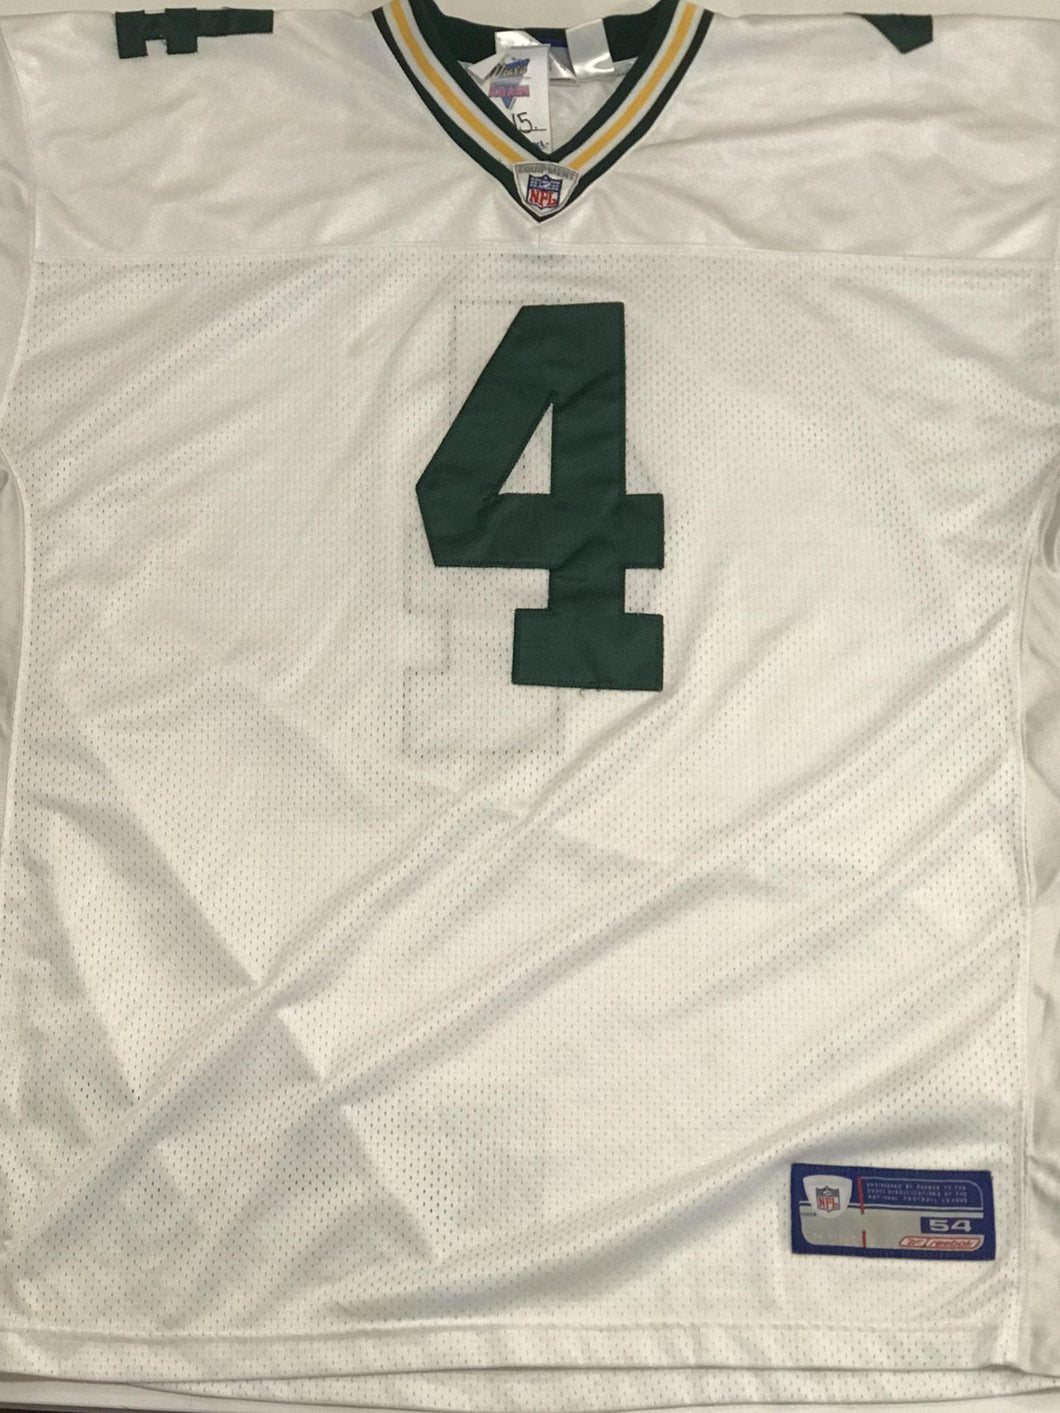 Green Bay Packers Jersey (White) Favre #4